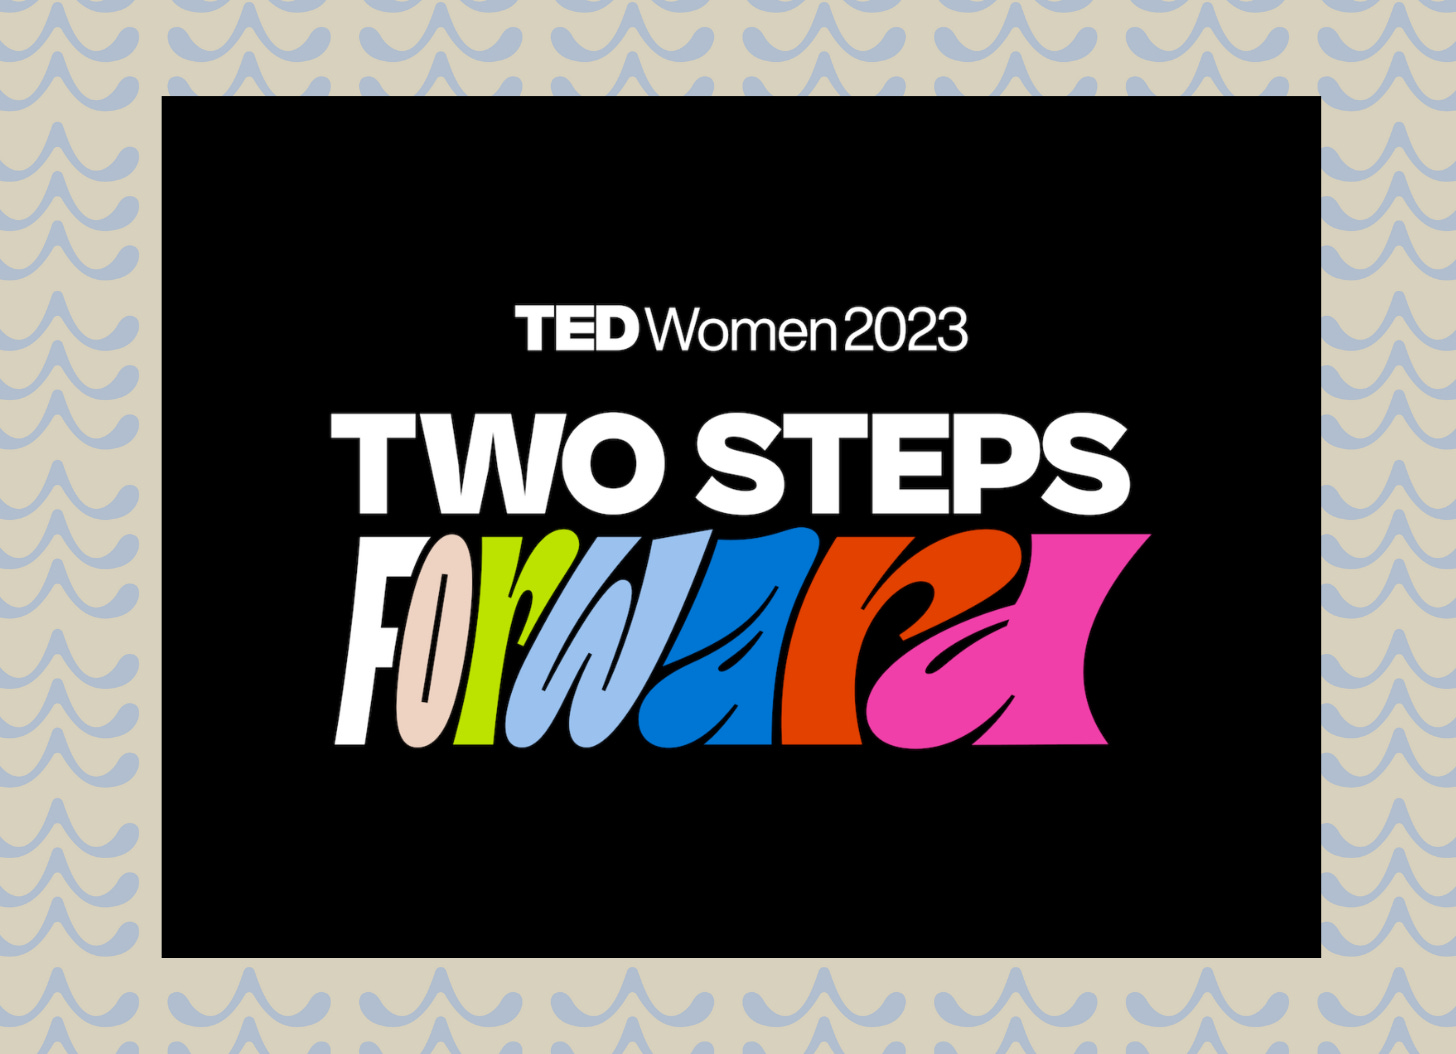 The theme for TEDWomen 2023: Two Steps Forward